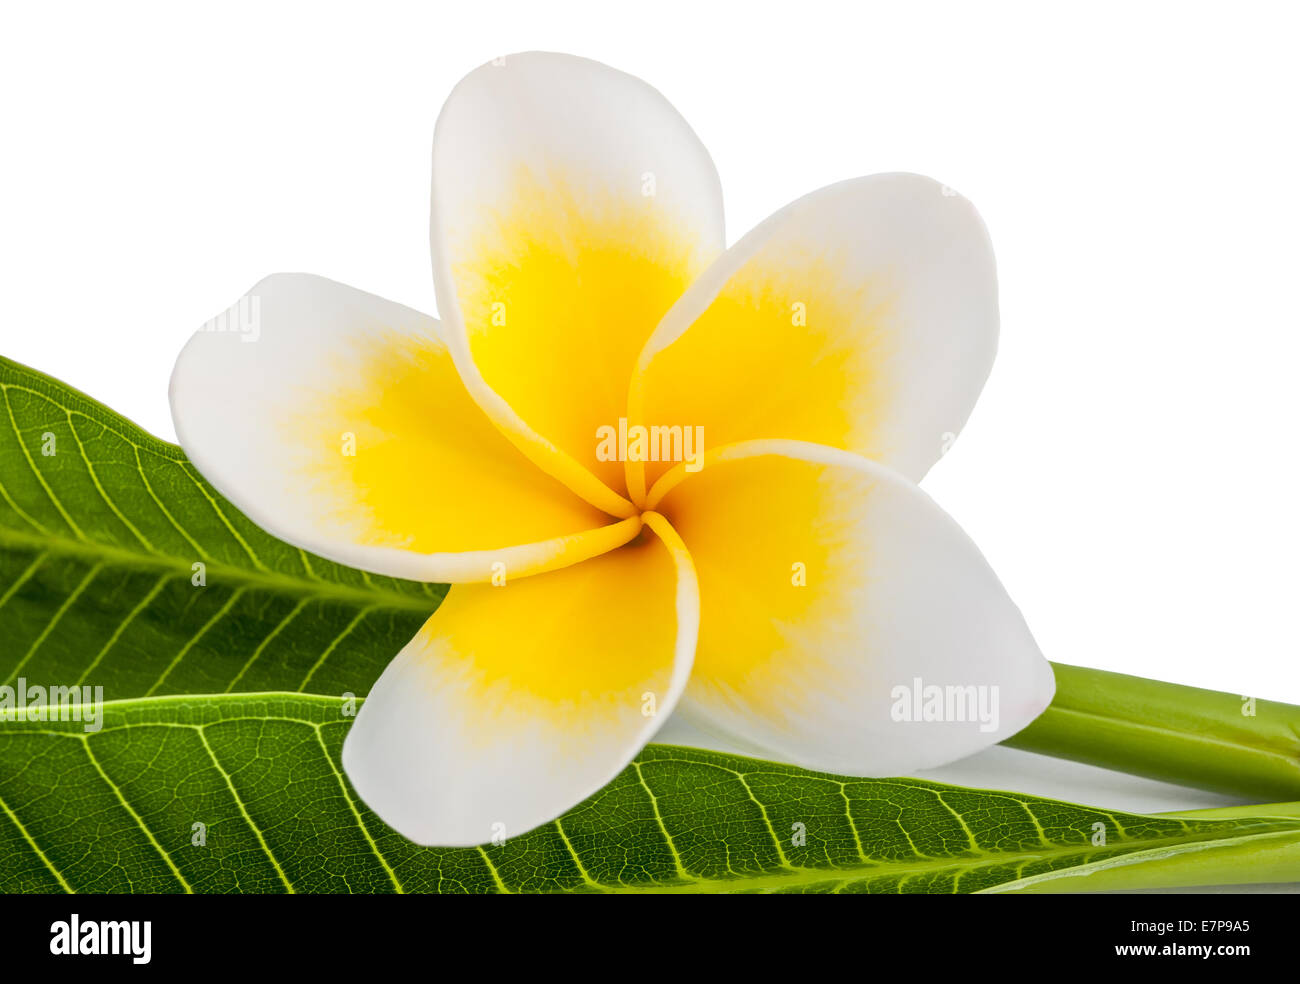 Frangipani flower with leaves isolated on white Stock Photo